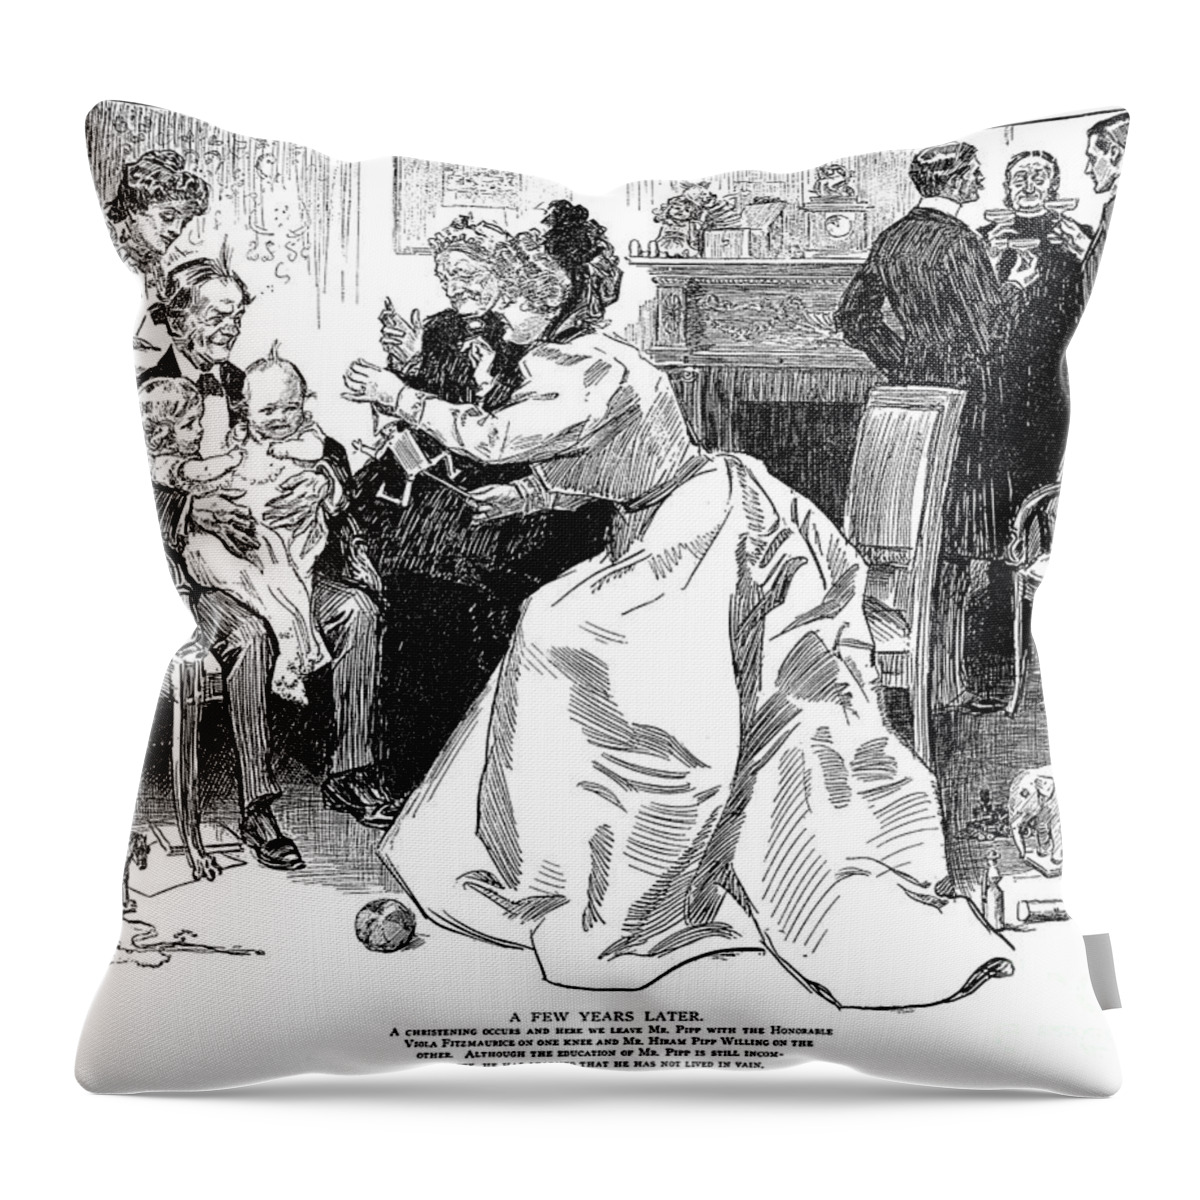 1899 Throw Pillow featuring the photograph Gibson: A Few Years Later by Granger